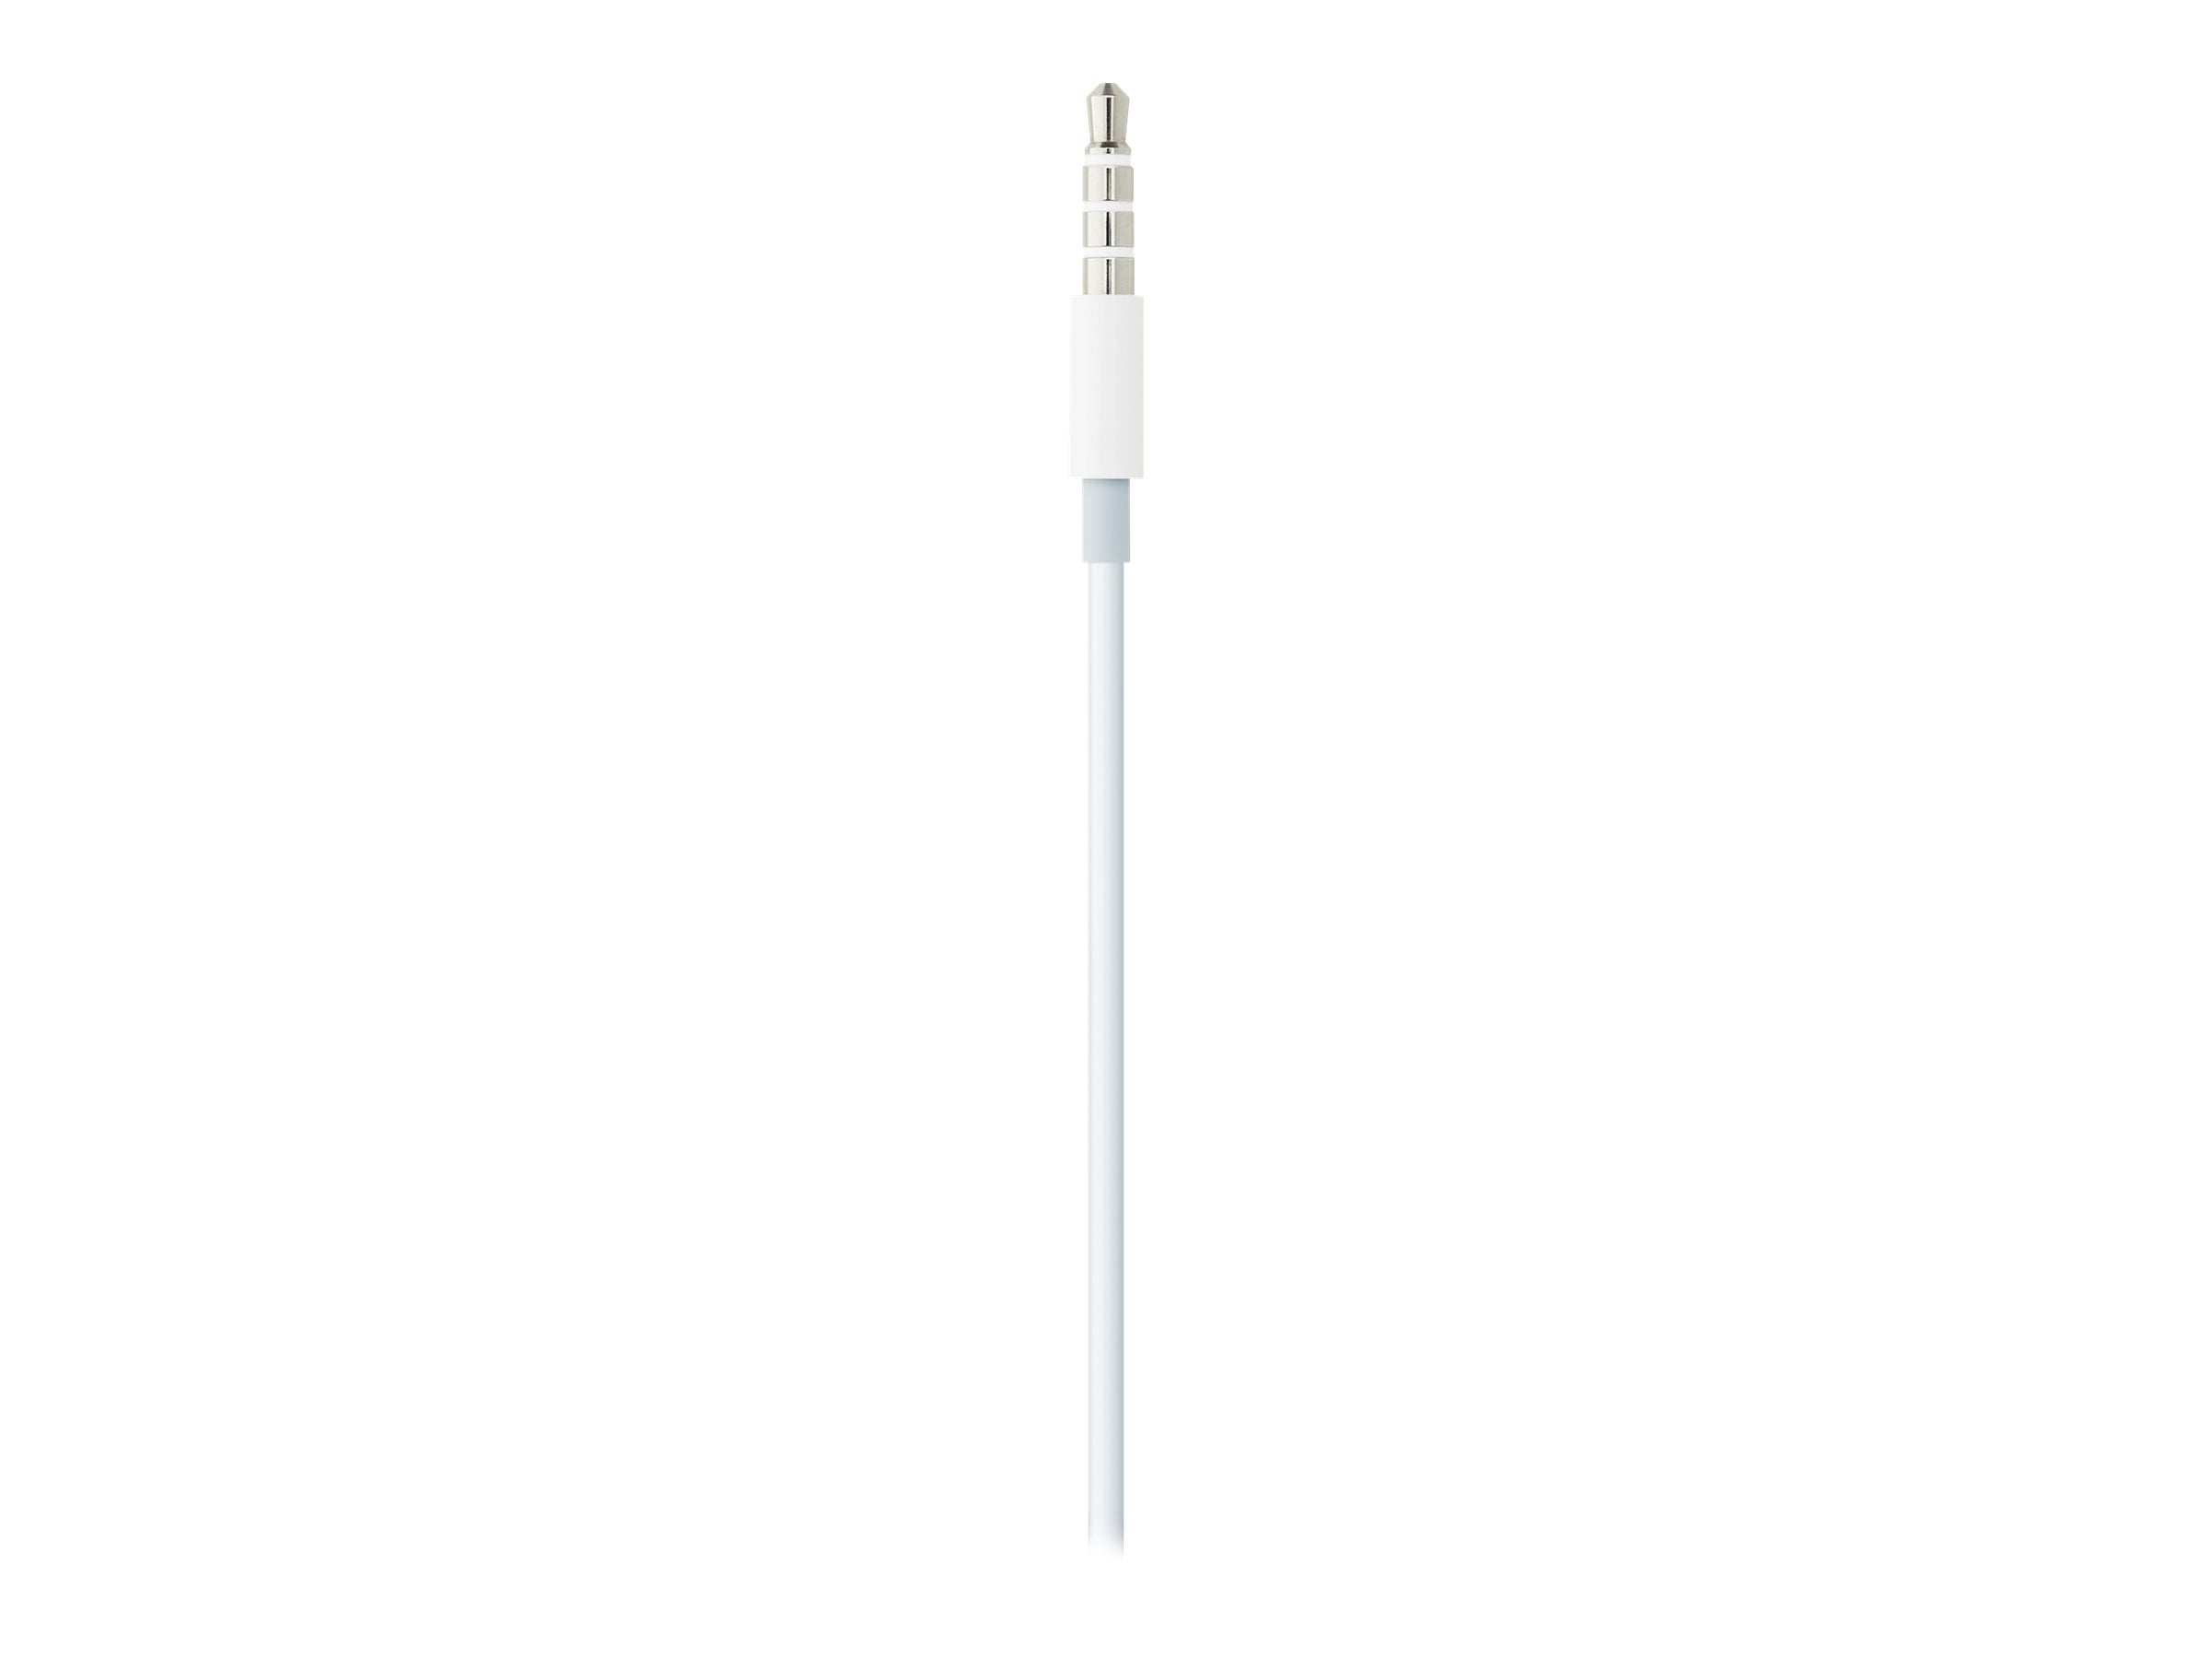 OEM Apple EarPods with Remote and Mic - 2 Pack (Bulk Packaging